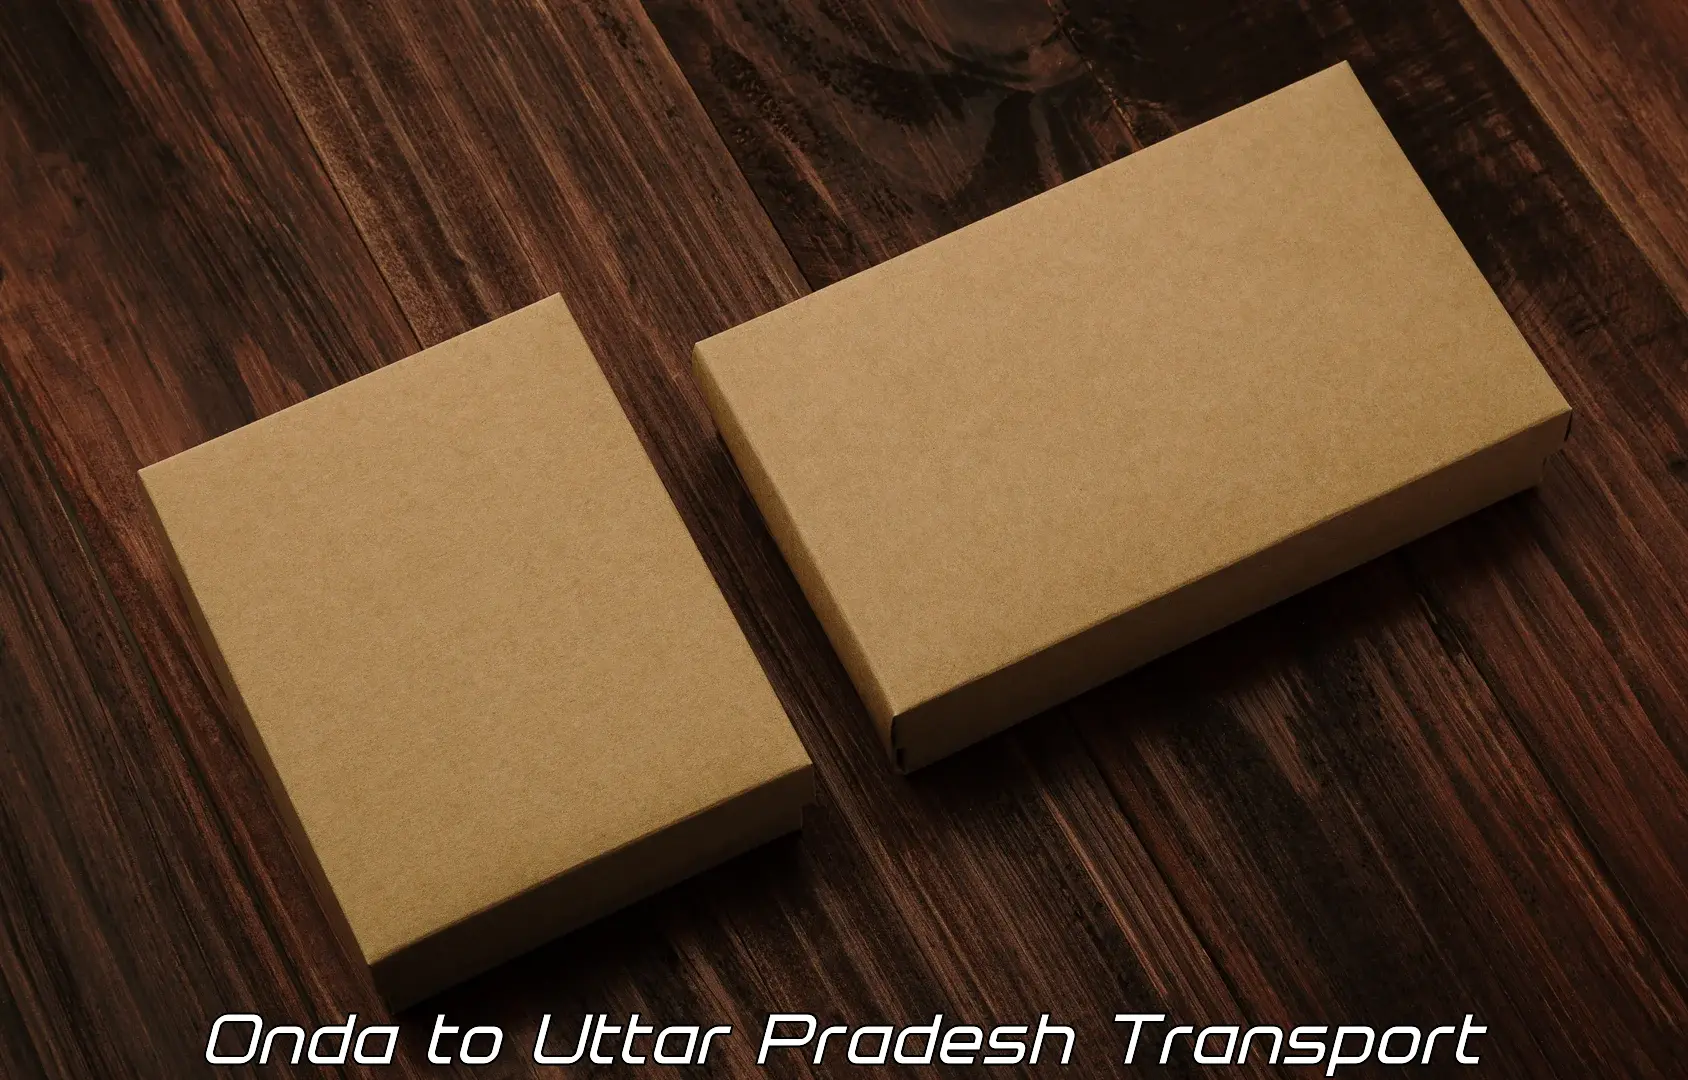 Transport in sharing Onda to Sultanpur